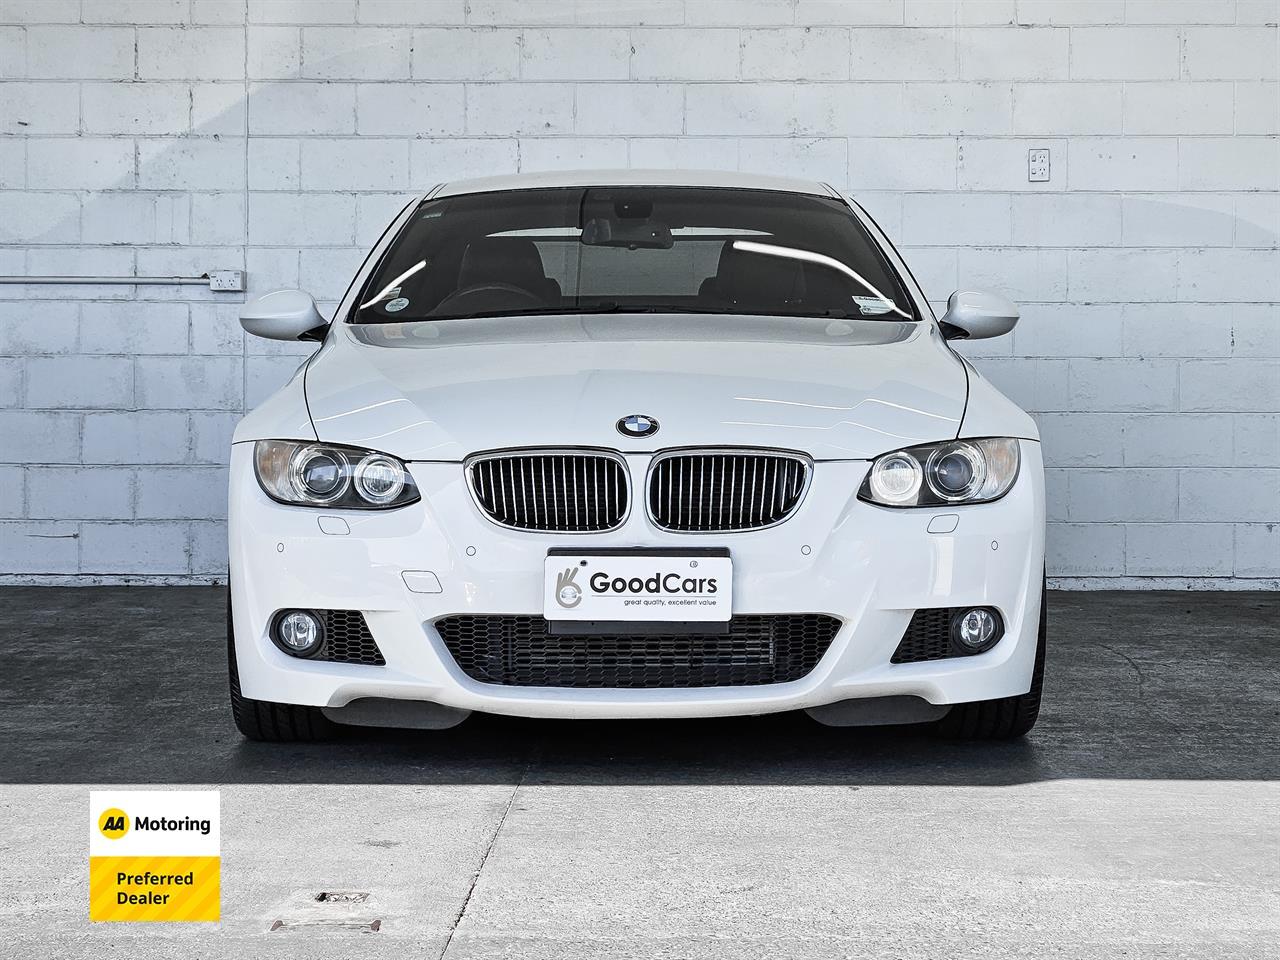 image-6, 2008 BMW 335i M Sport Coupe at Christchurch